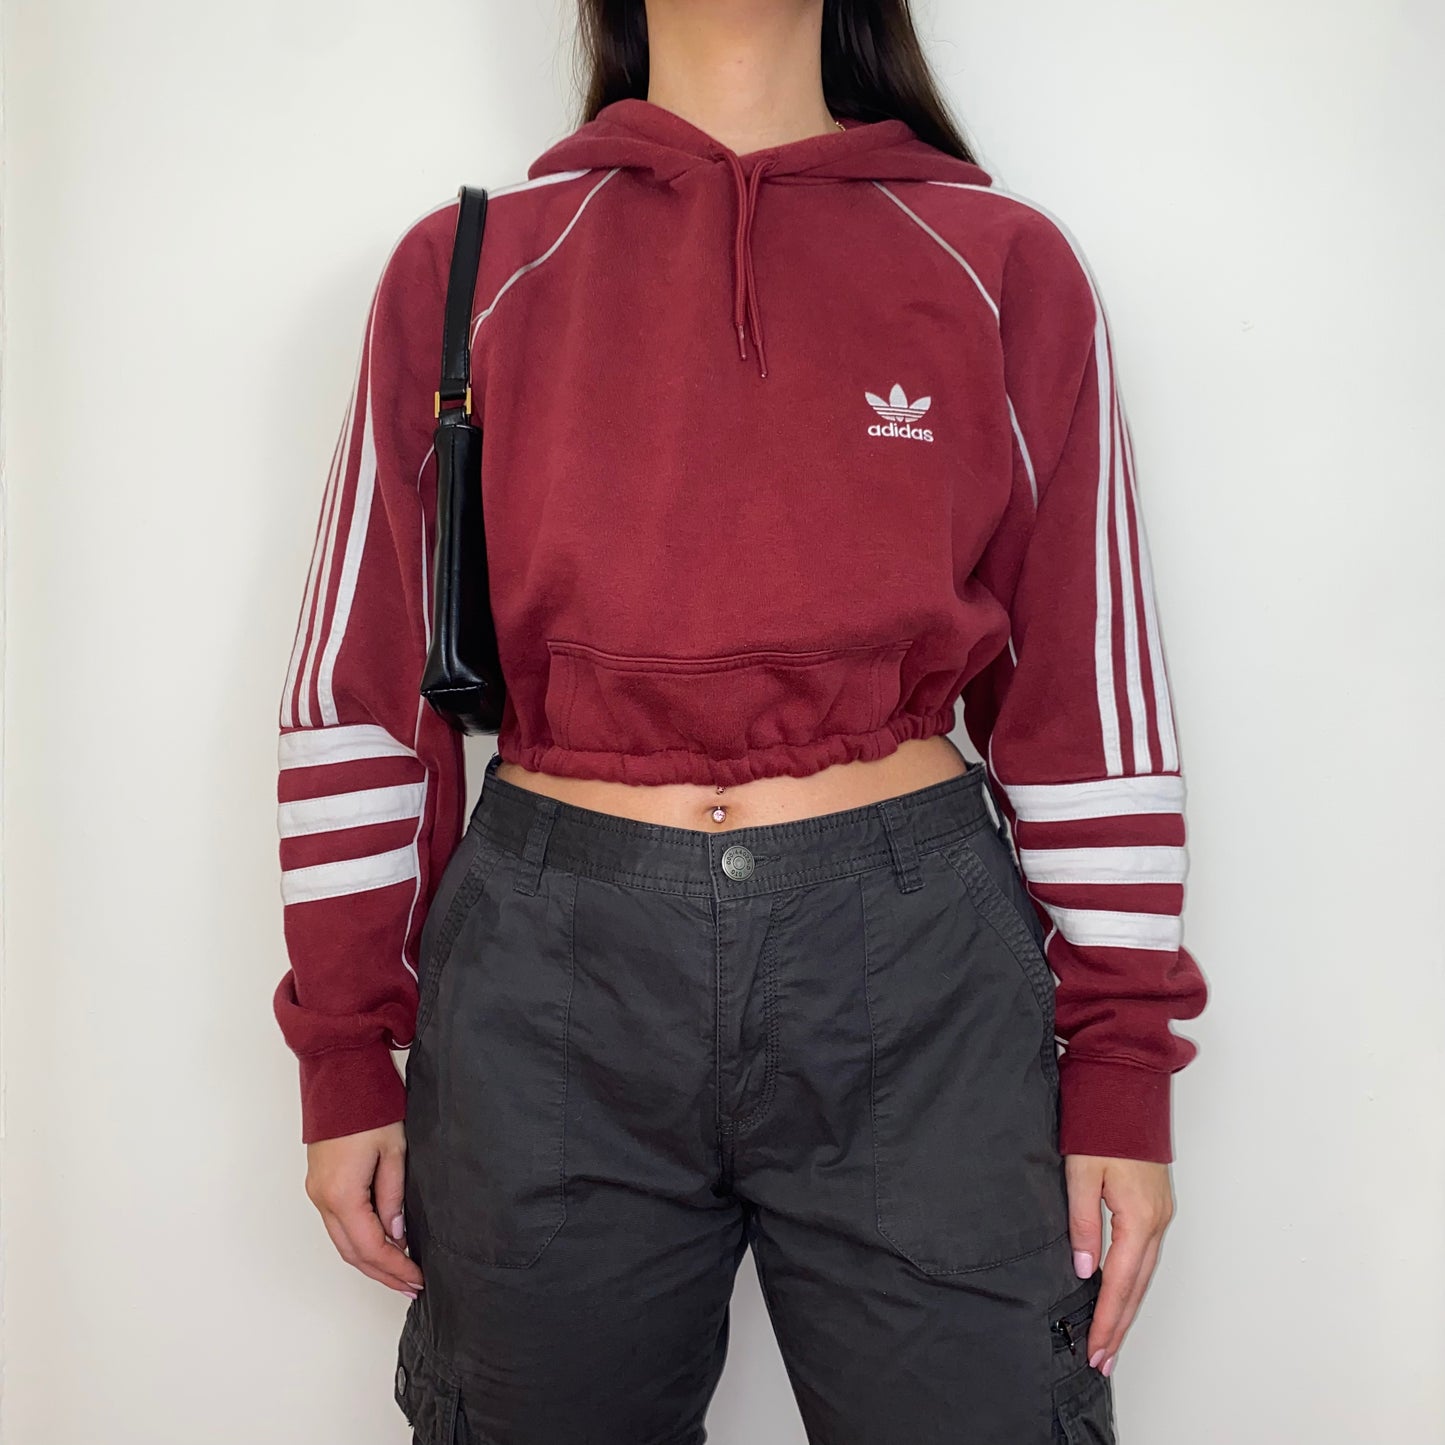 burgundy cropped hoodie with white adidas logo shown on a model wearing grey cargos and a black shoulder bag